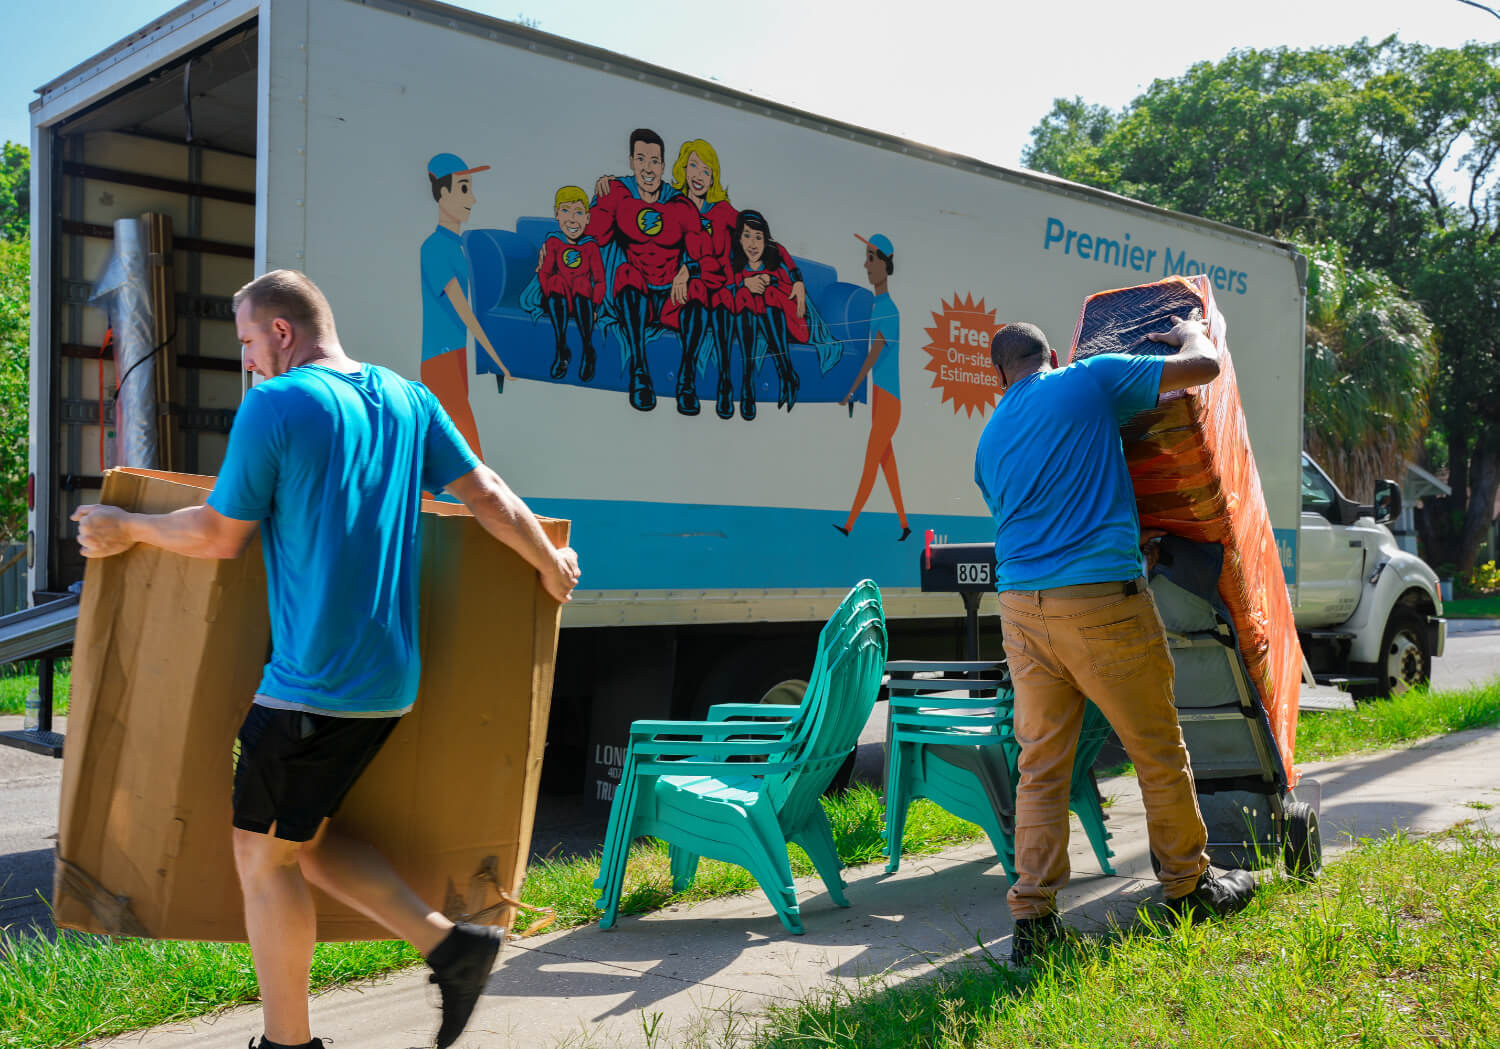 How to save $500 on your next moving service.